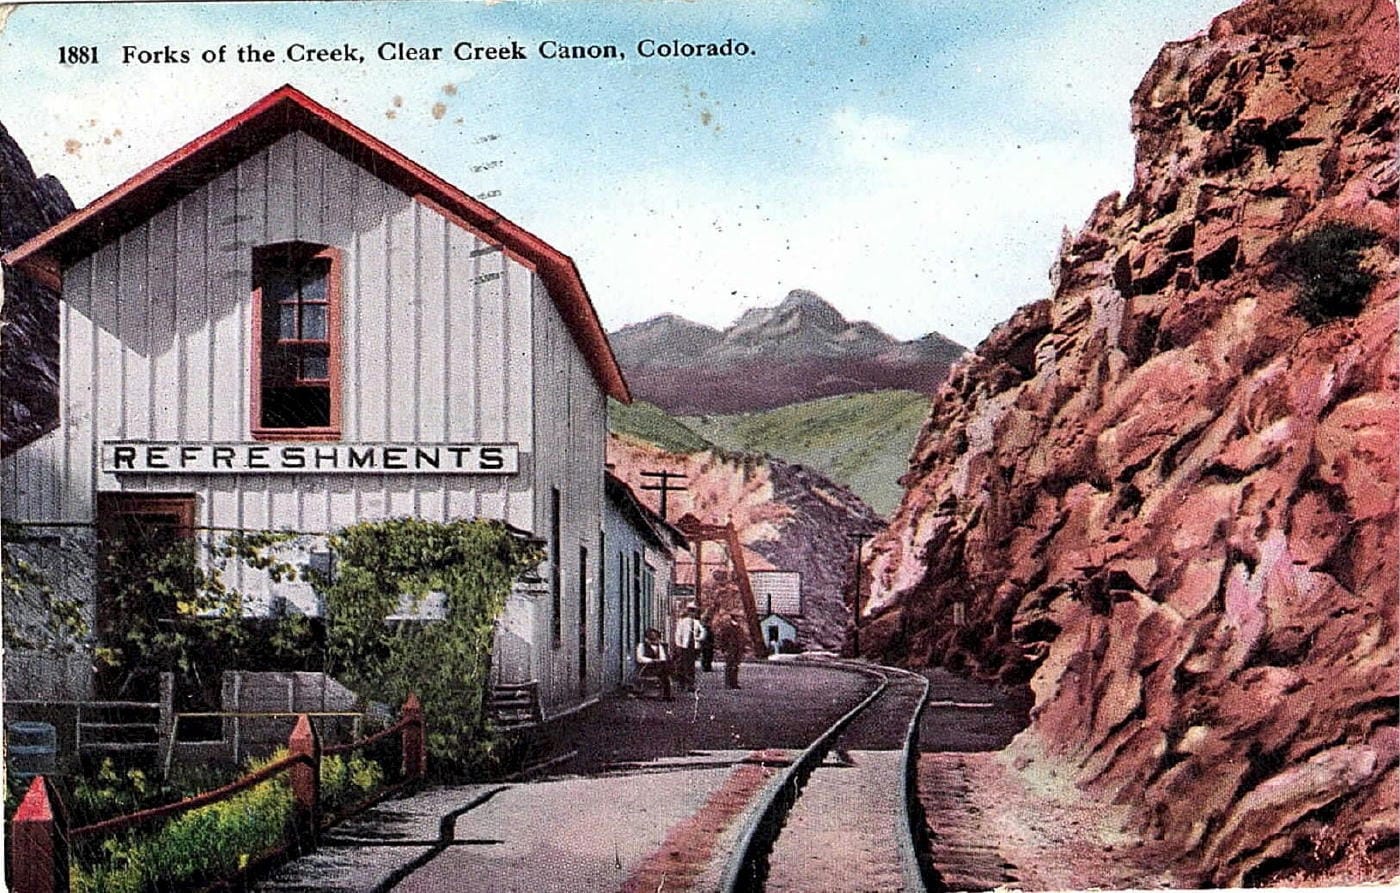 "Forks of the Creek" shows a white depot with "REFRESHMENTS" sign next to narrow gauge tracks.